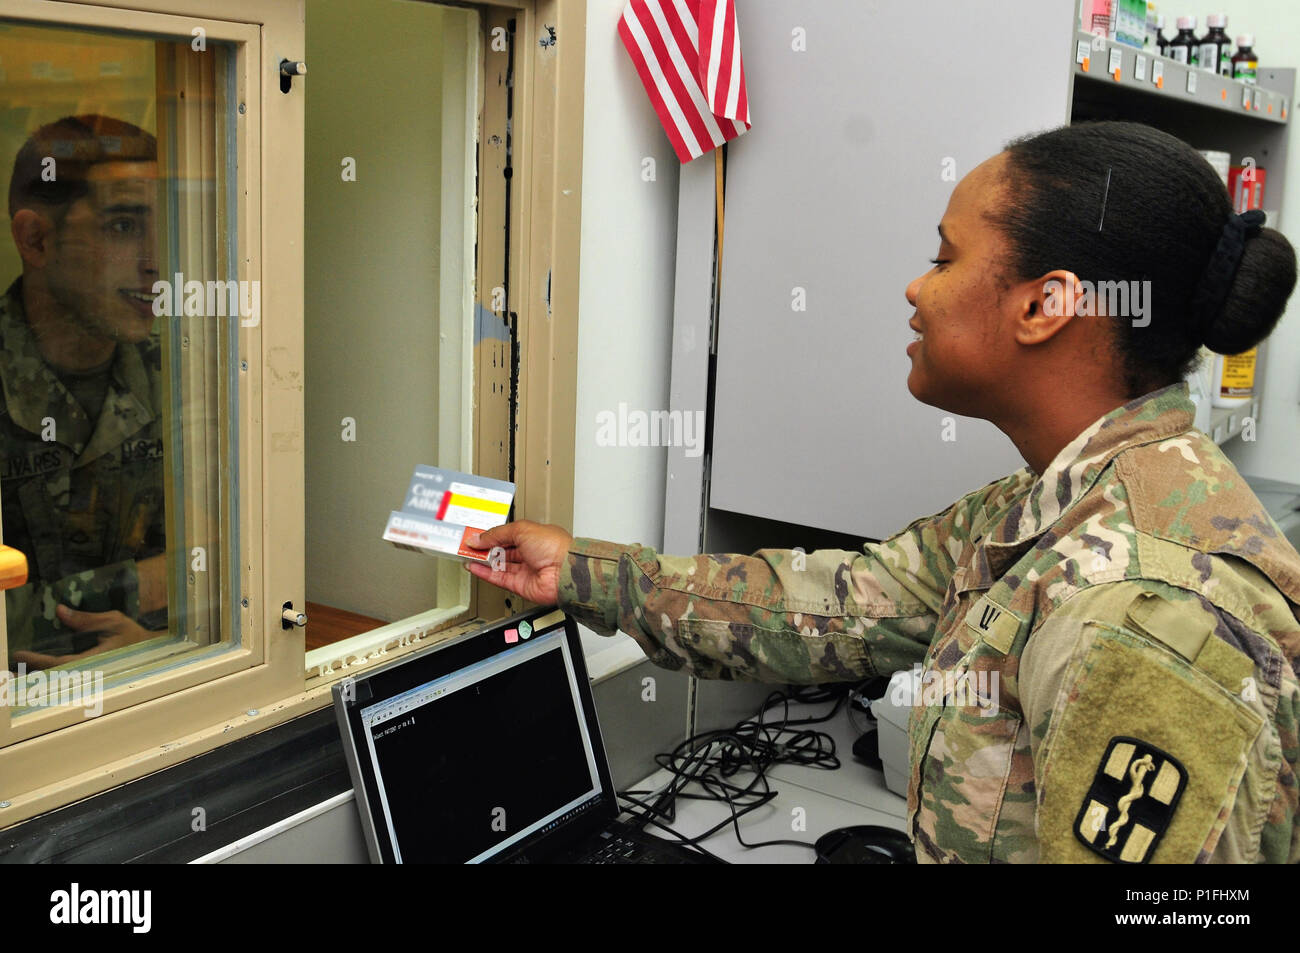 Sgt. Jessica Evans, pharmacy specialist with the 31st Combat Support Hospital and Clewiston, Fla. native, hands out a perscription to a Soldier Oct. 25, 2016 at Camp Arifjan, Kuwait. Evans along with a small team of Soldiers operate the 31st CSH pharmacy providing pharmaceutical support to patients suffering from injuries and illnesses throughout the ARCENT area of operations. The team processes more than 3,500 outpatient prescriptions a month to service members and civilians while providing support to inpatient care and other facilities throughout the region. (U.S. Army photo by Sgt. Aaron El Stock Photo